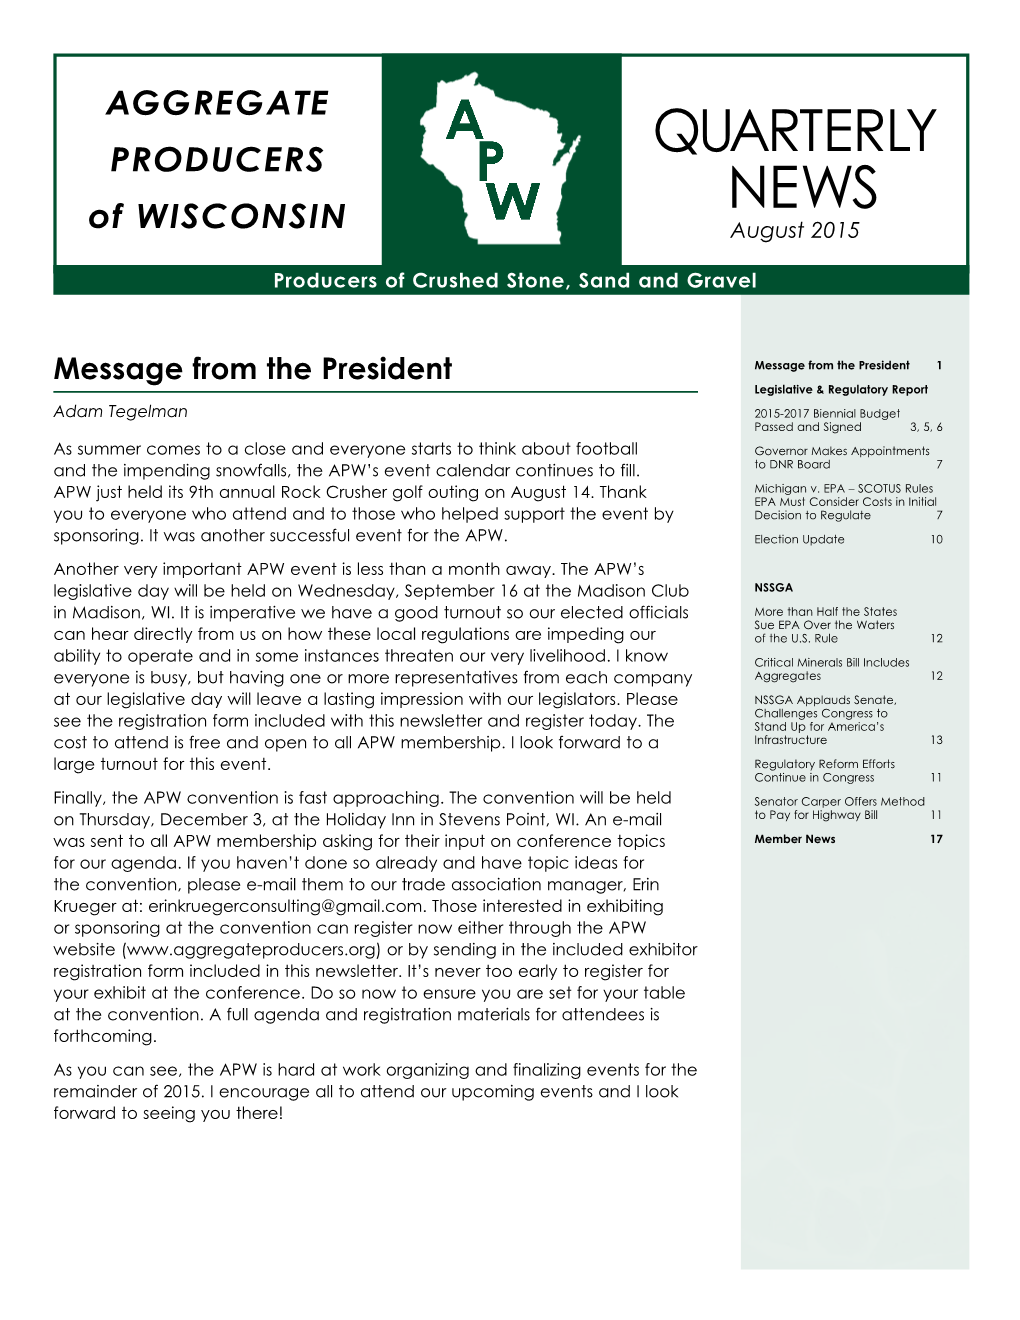 QUARTERLY NEWS of WISCONSIN August 2015